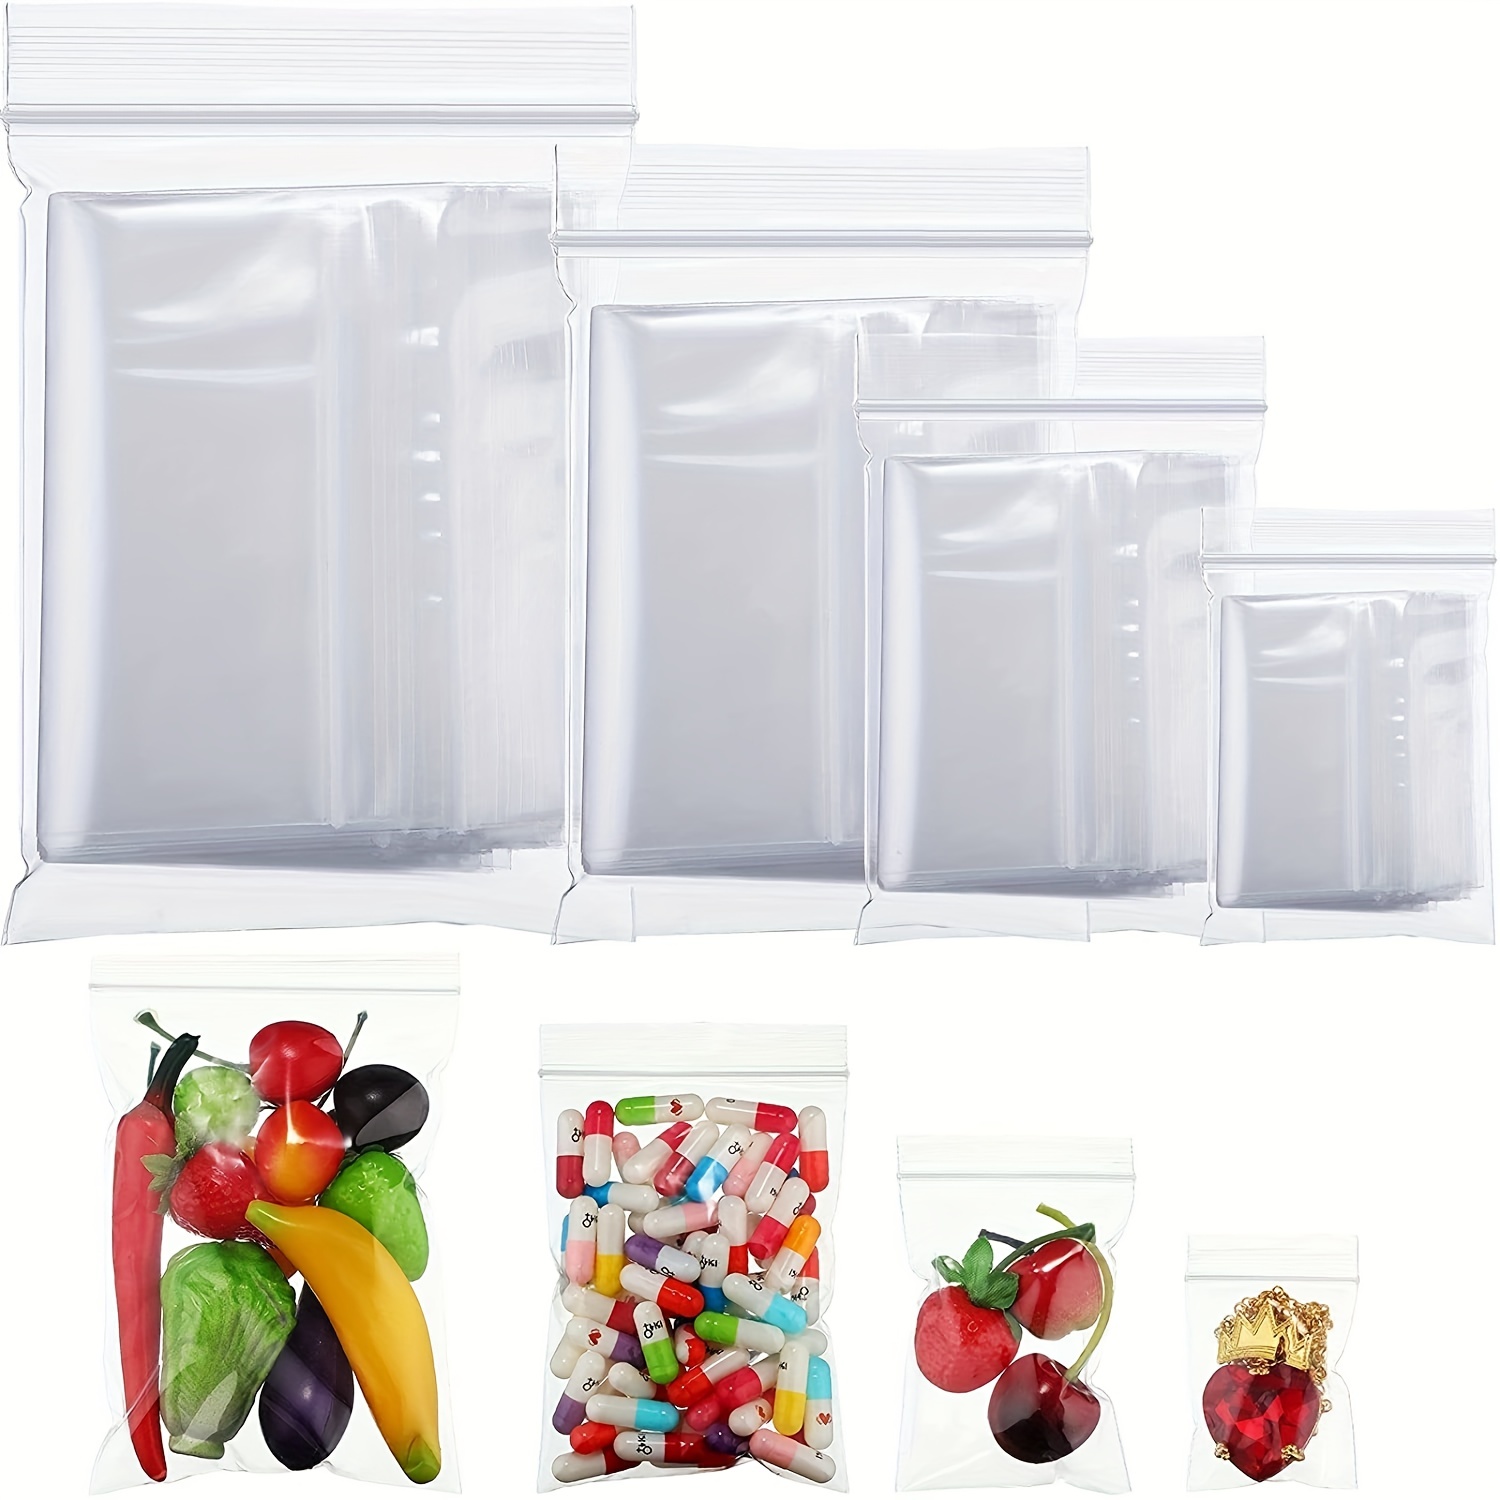  Jewelry Baggies 5 Sizes 500pcs Small Sealable Zipper Bags Clear  Plastic Zip Bags Tiny Poly Assorted Bags 2 Mil for Beads Craft Seed Pill  Candy Coin (8 Sizes to Choose from) 